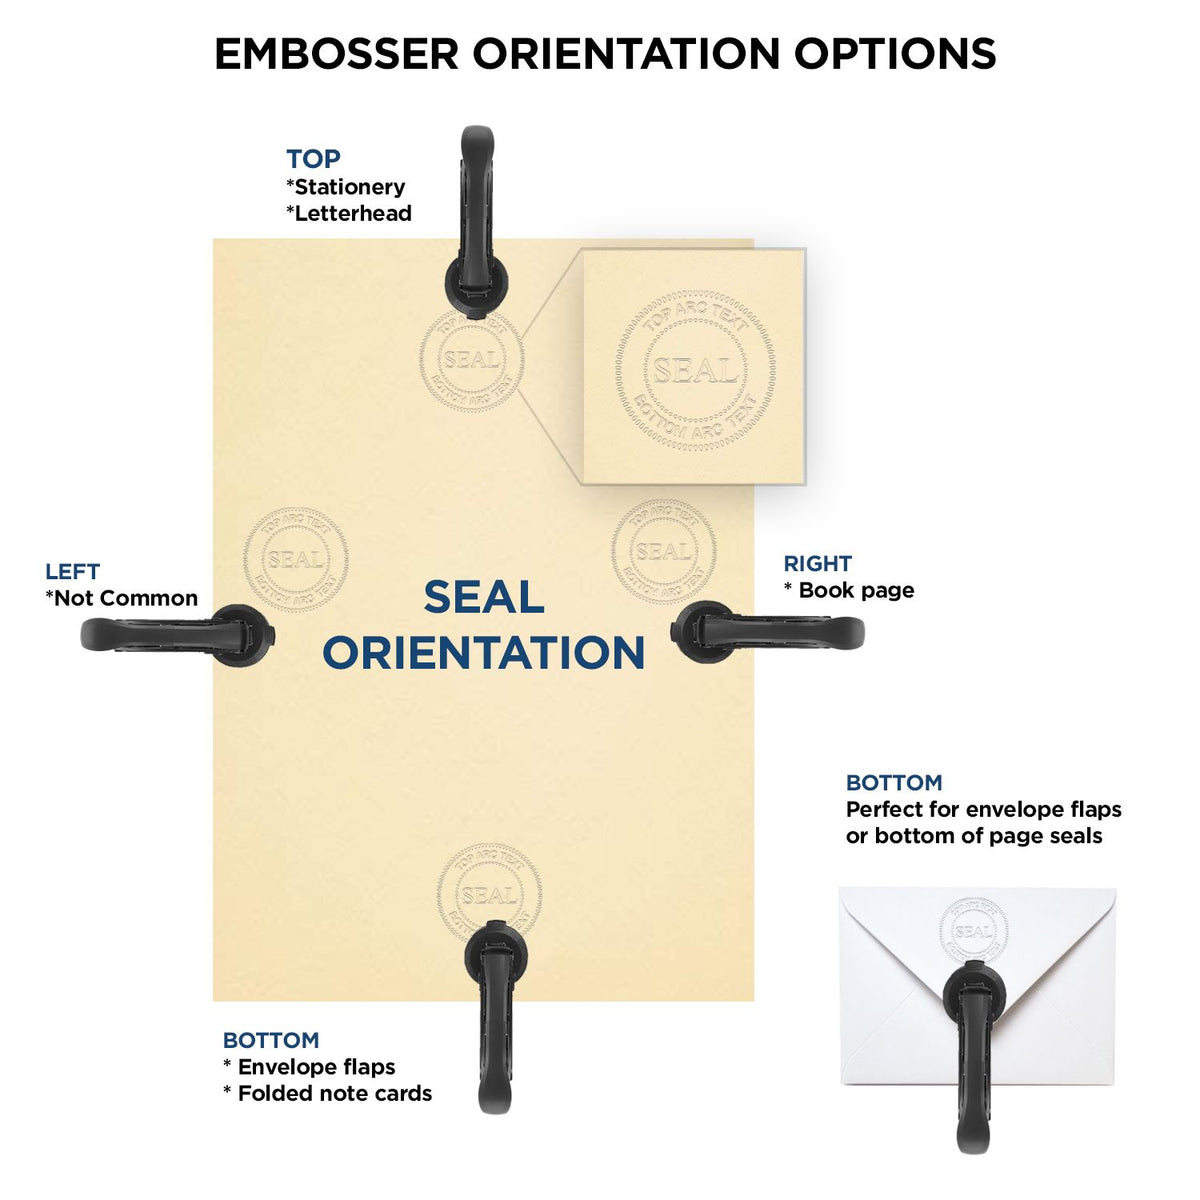 An infographic for the Handheld Hawaii Professional Geologist Embosser showing embosser orientation, this is showing examples of a top, bottom, right and left insert.